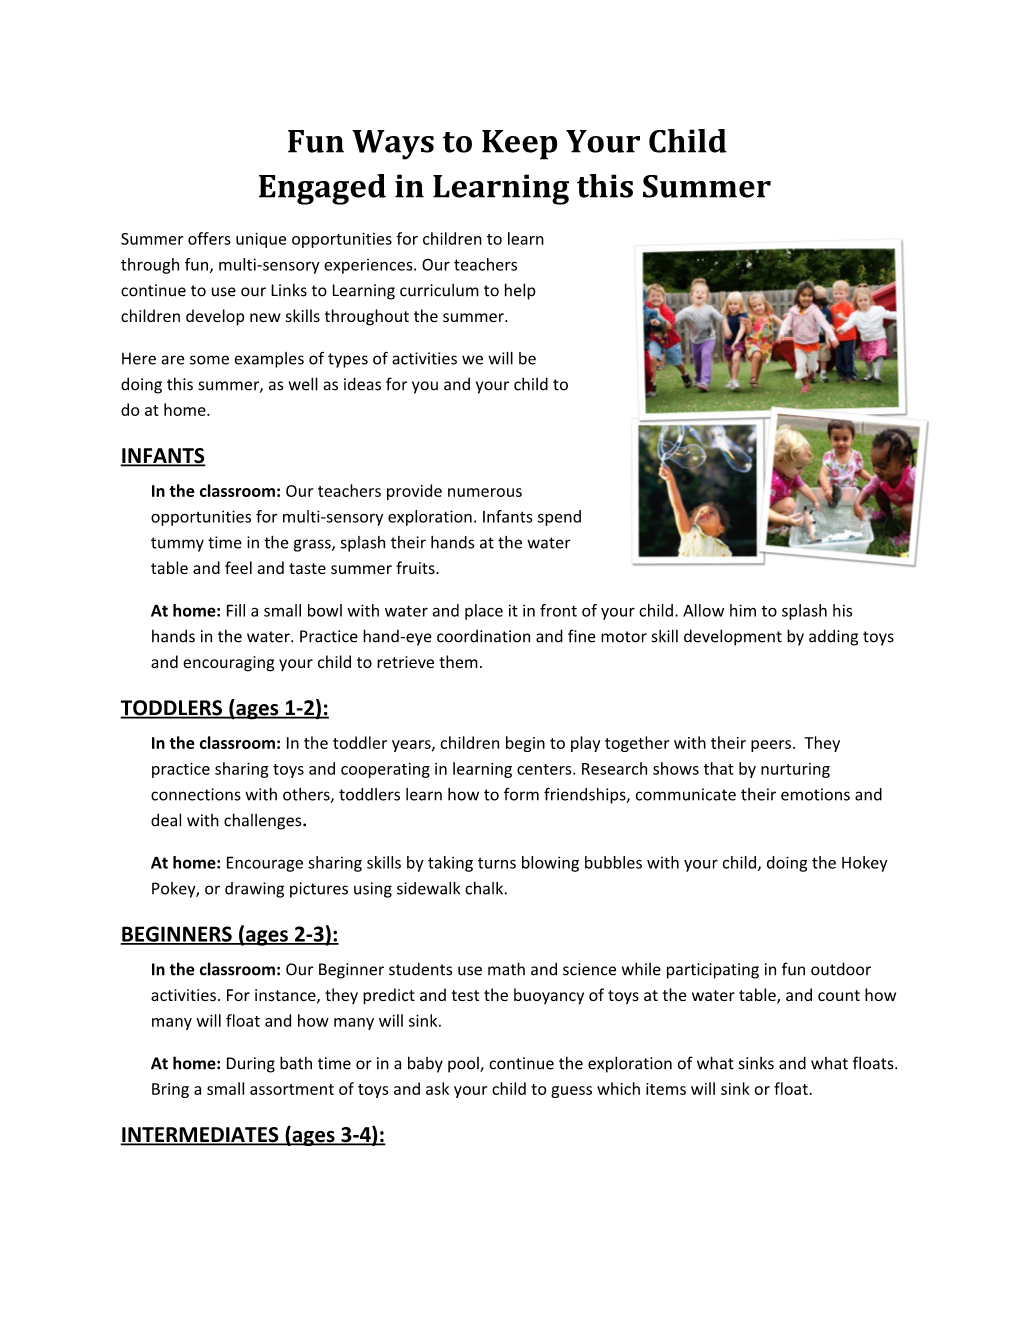 Fun Ways to Keep Your Child Engaged in Learning This Summer